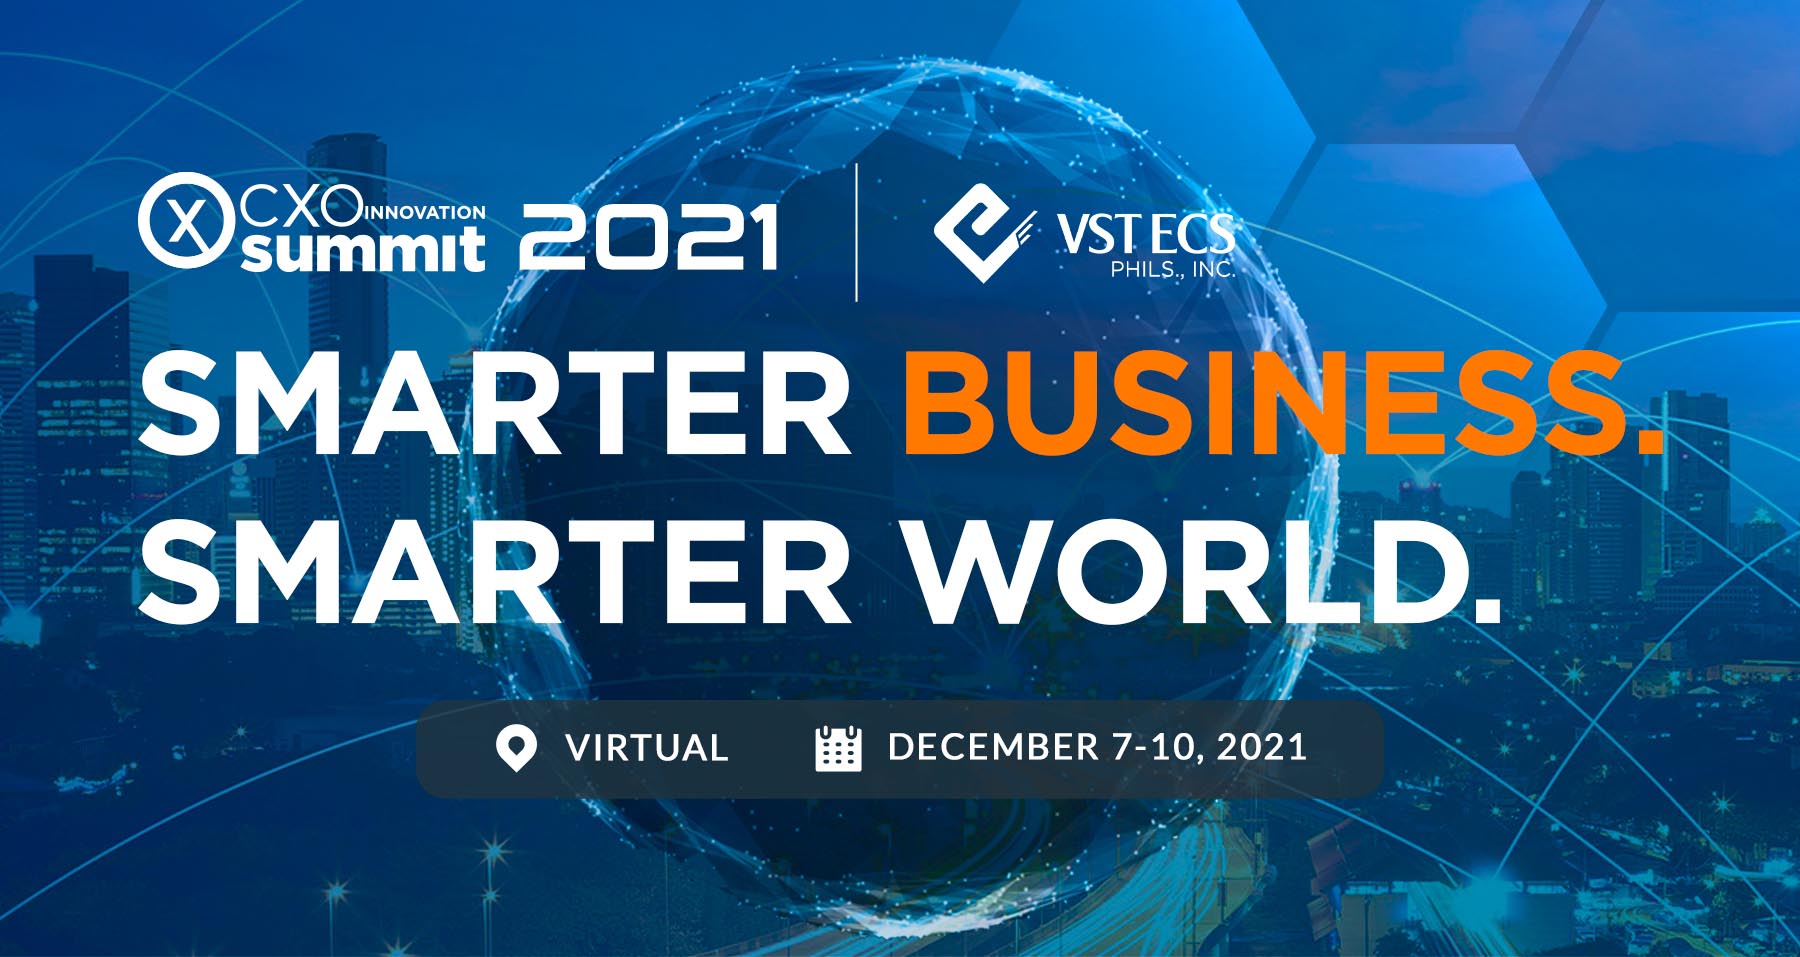 VSTECS CXO Innovation Summit gathers tech leaders to discuss the future of digital business